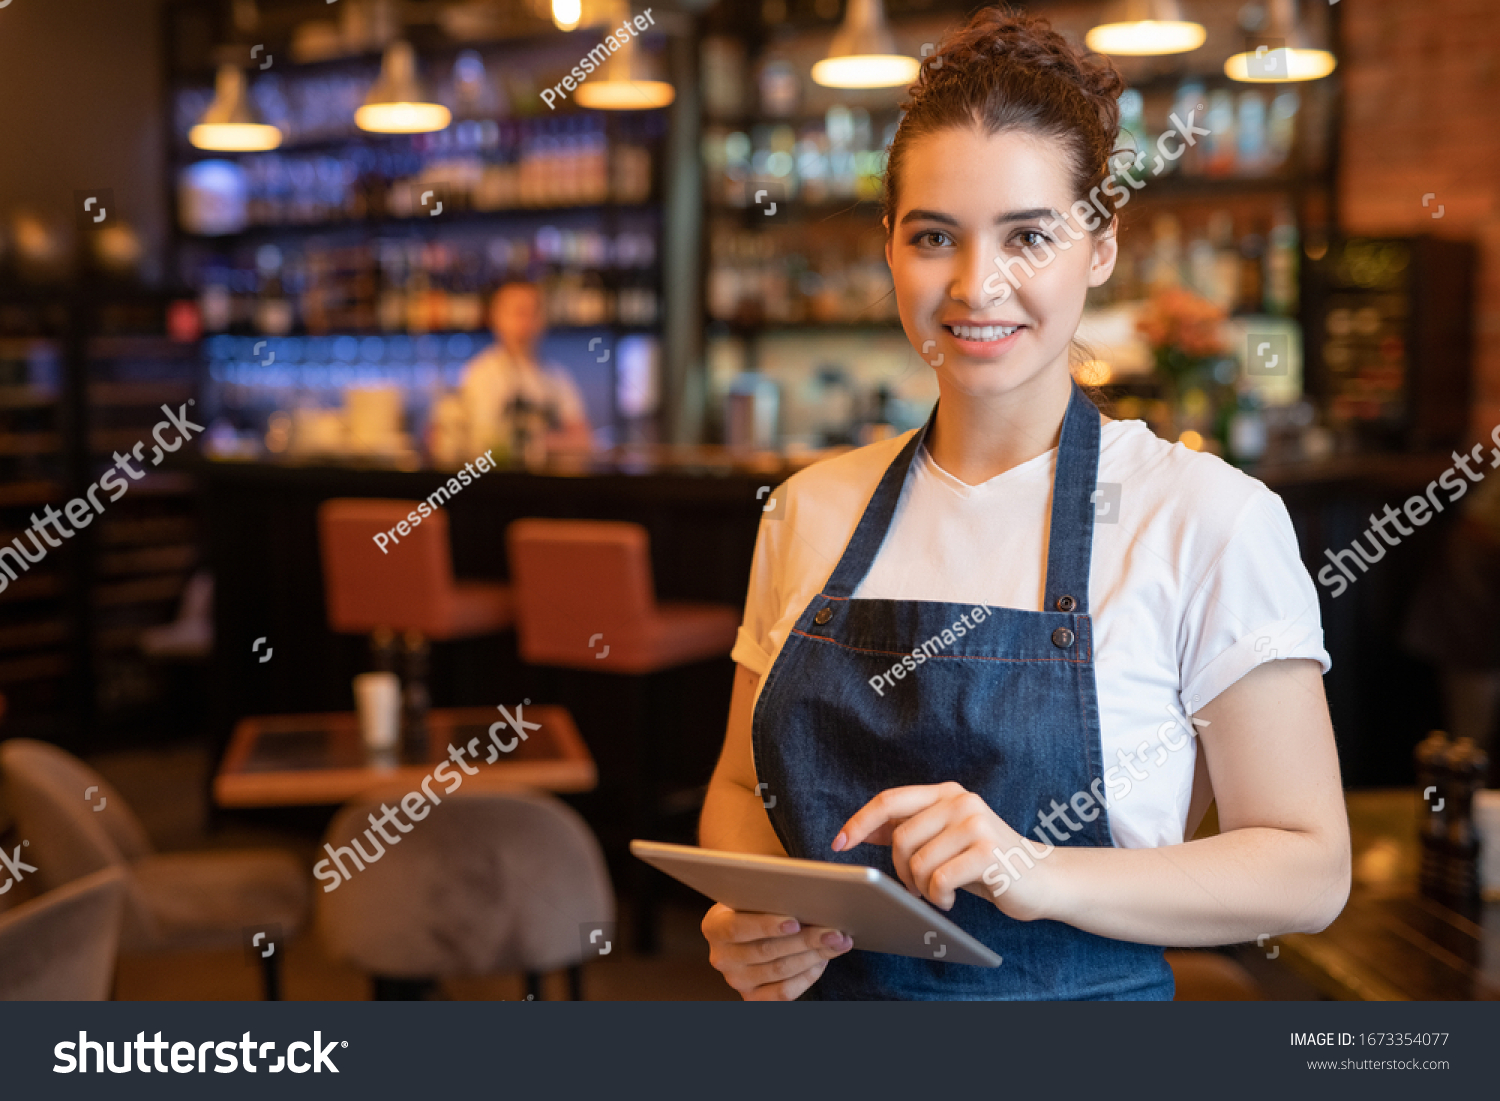 Young smiling waitress in apron and t-shirt standing in front of camera while using touchpad and meeting guests in cafe #1673354077